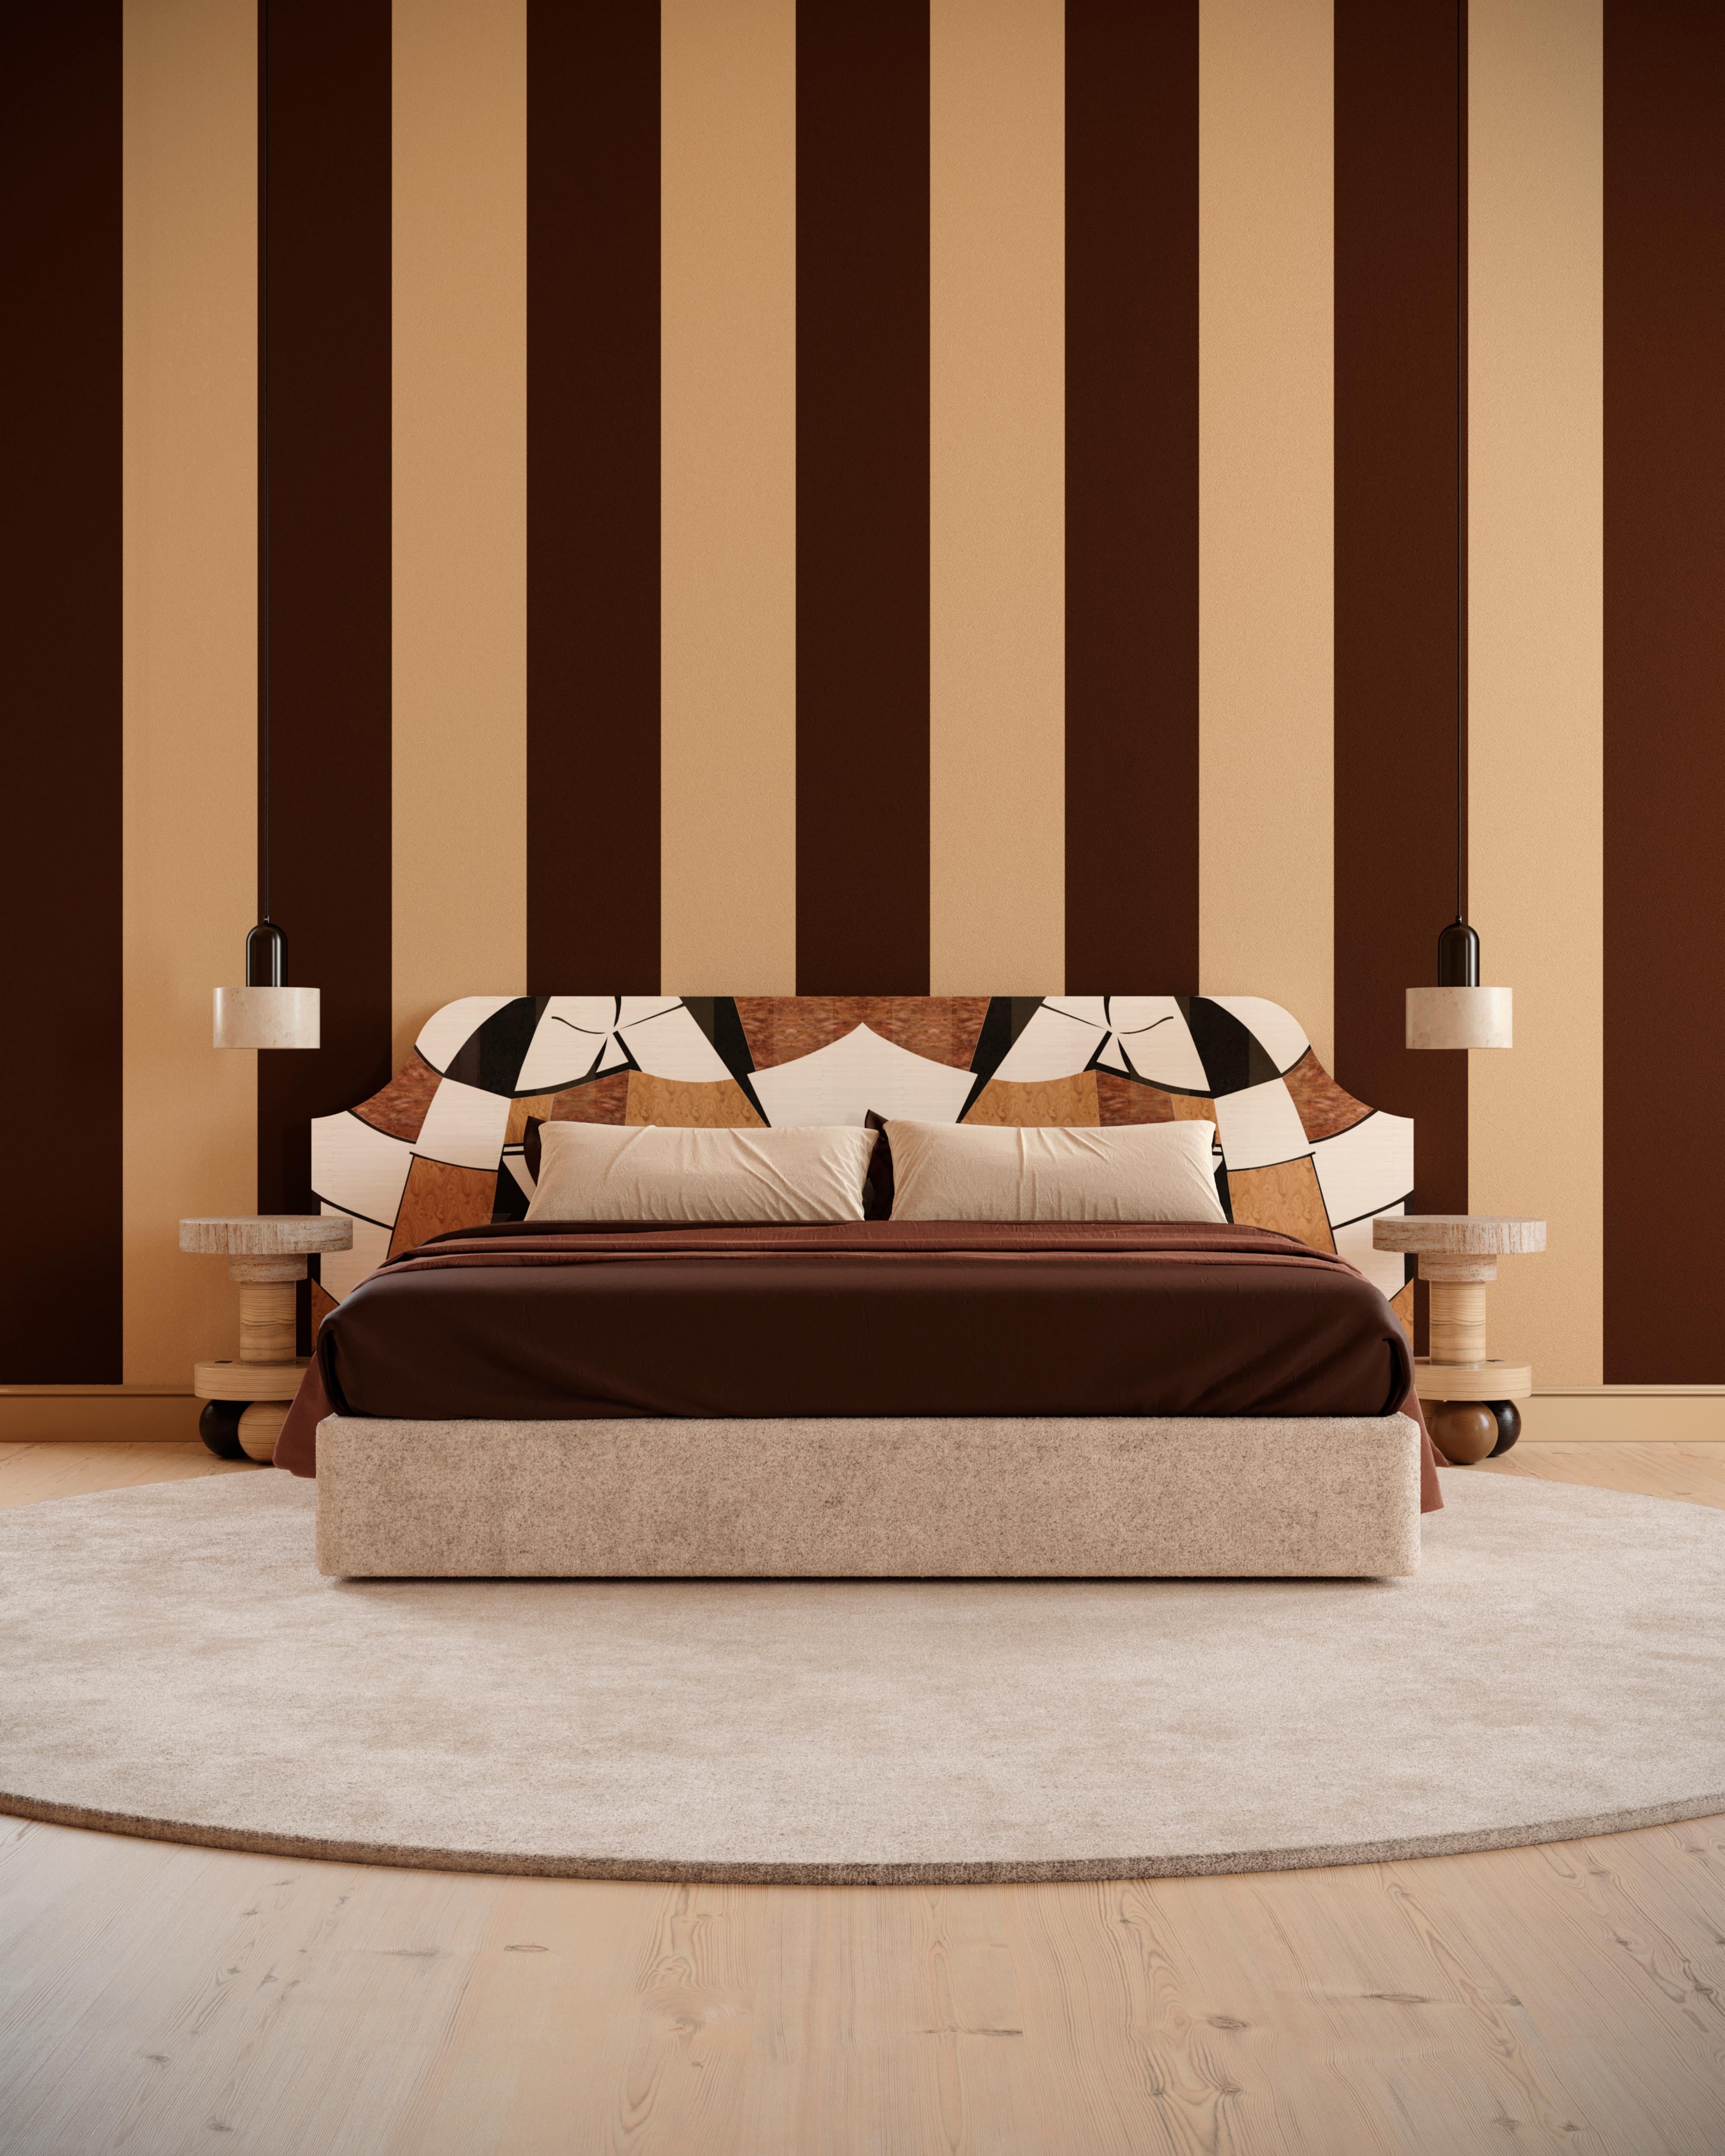 Austria Bed, where the timeless art of marquetry meets contemporary aesthetics. Its statement modern bed design with a meticulously crafted headboard in the ancestral art of marquetry exudes elegance and sophistication. With a seamless blend of wood